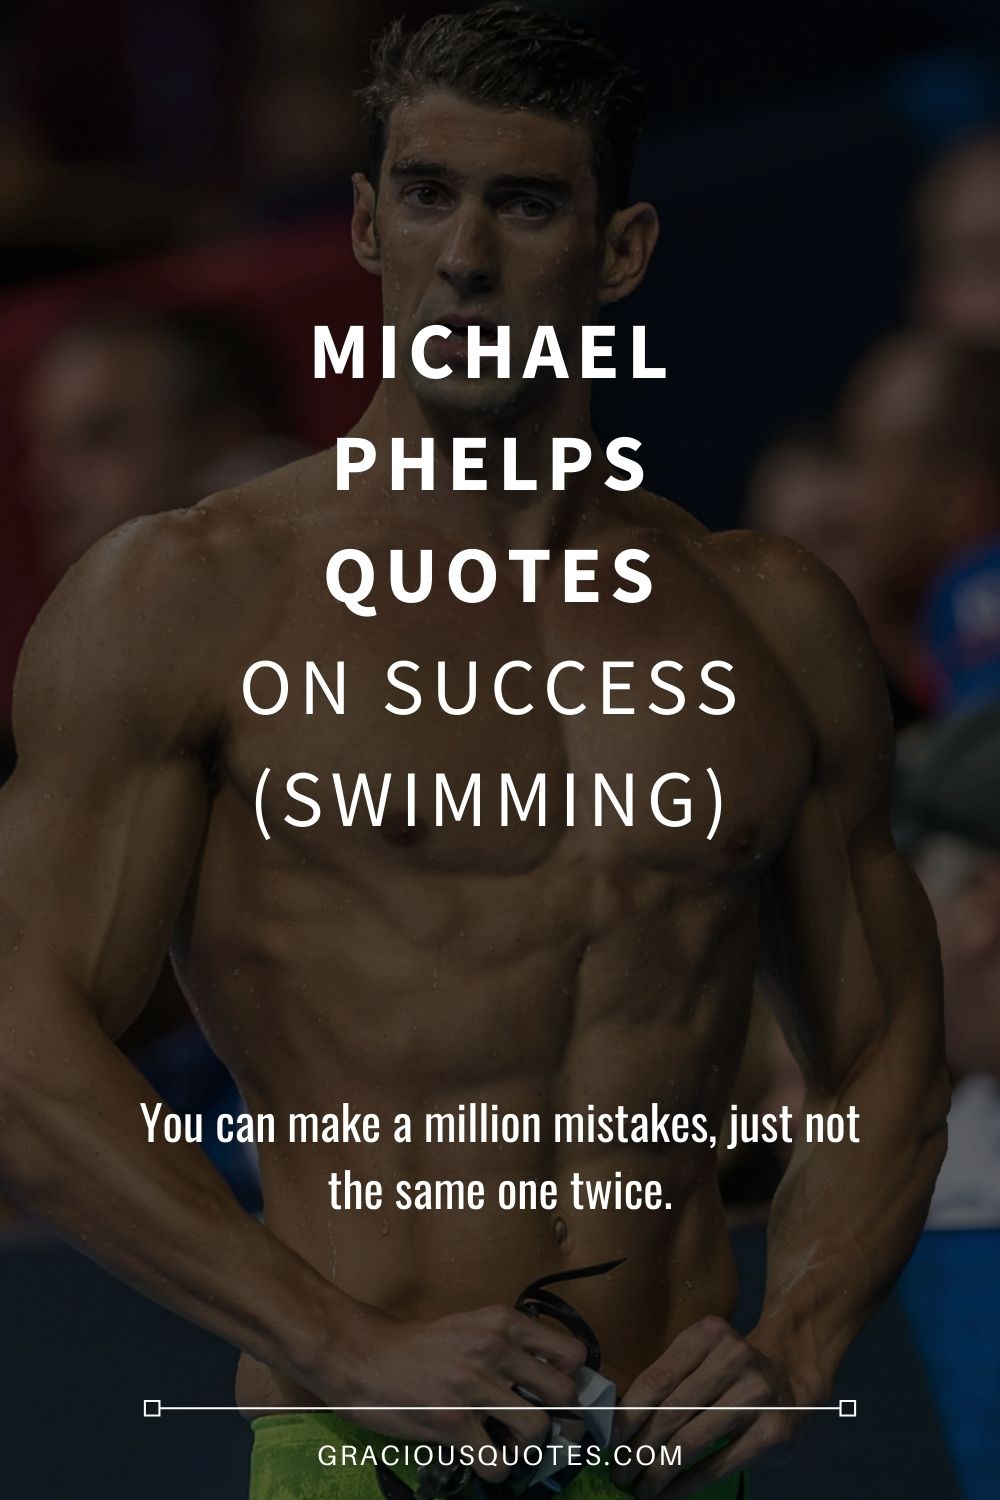 Michael Phelps Quotes on Success (SWIMMING) - Gracious Quotes